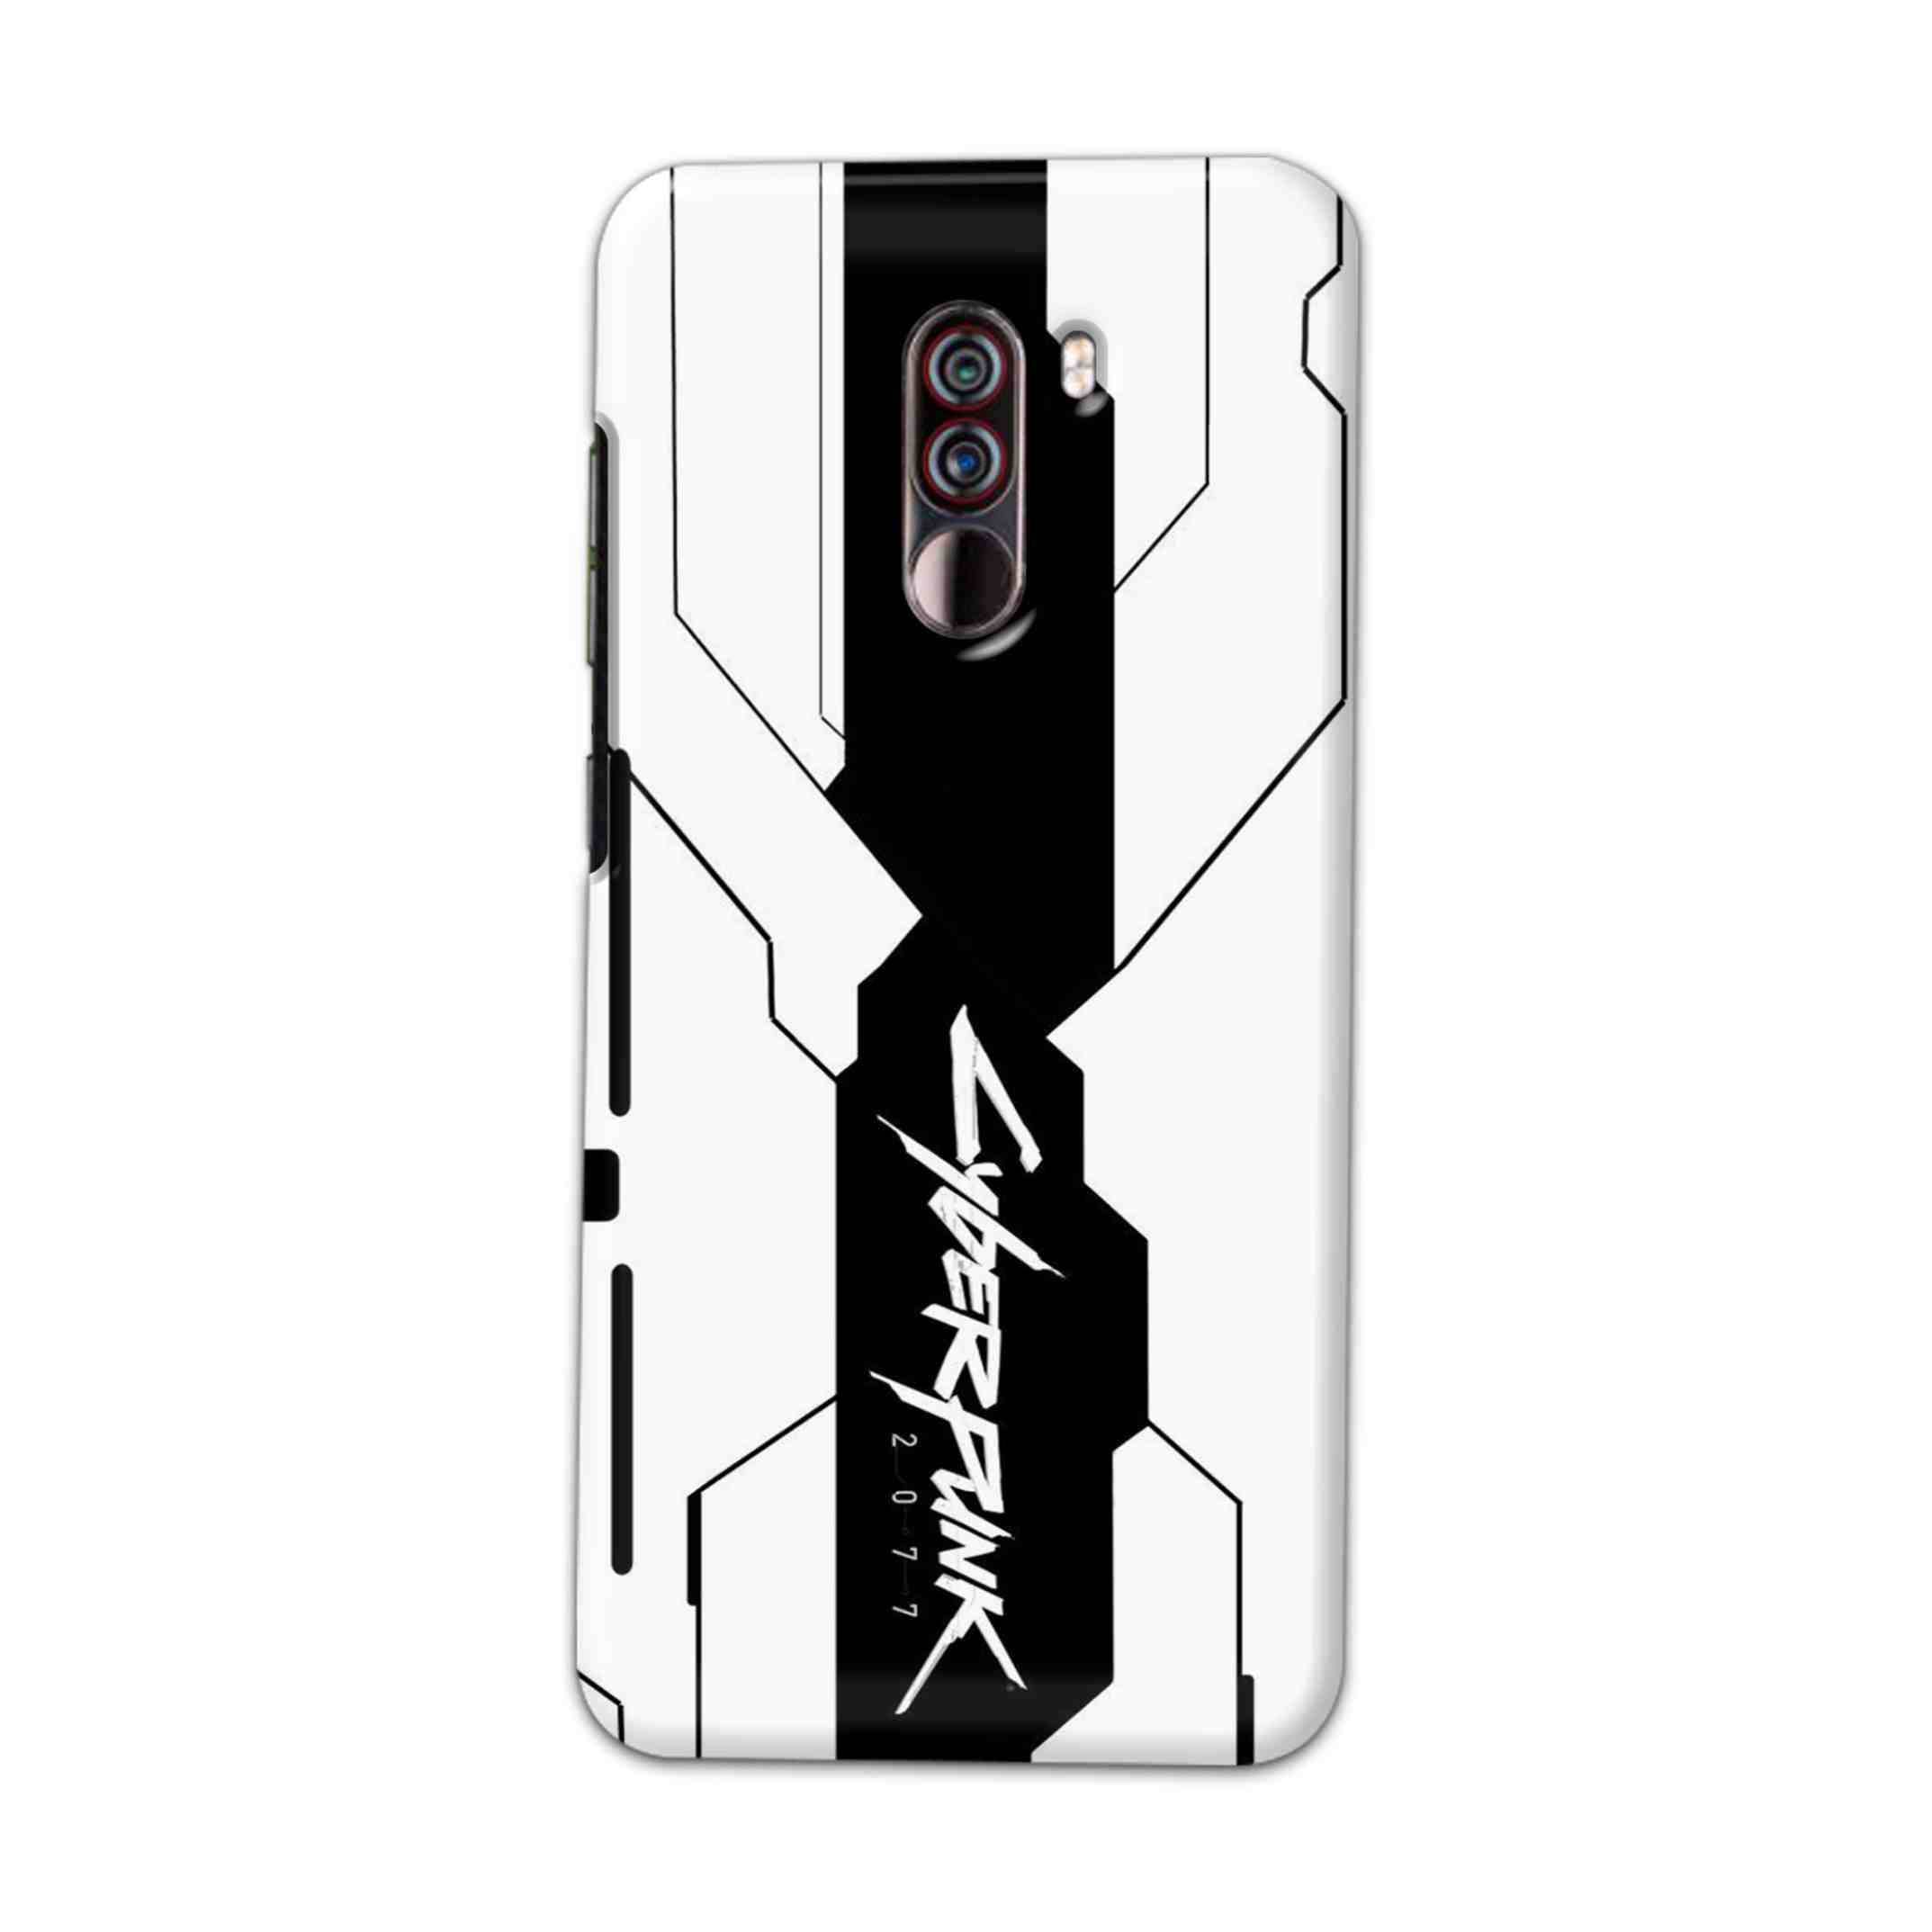 Buy Cyberpunk 2077 Hard Back Mobile Phone Case Cover For Xiaomi Pocophone F1 Online